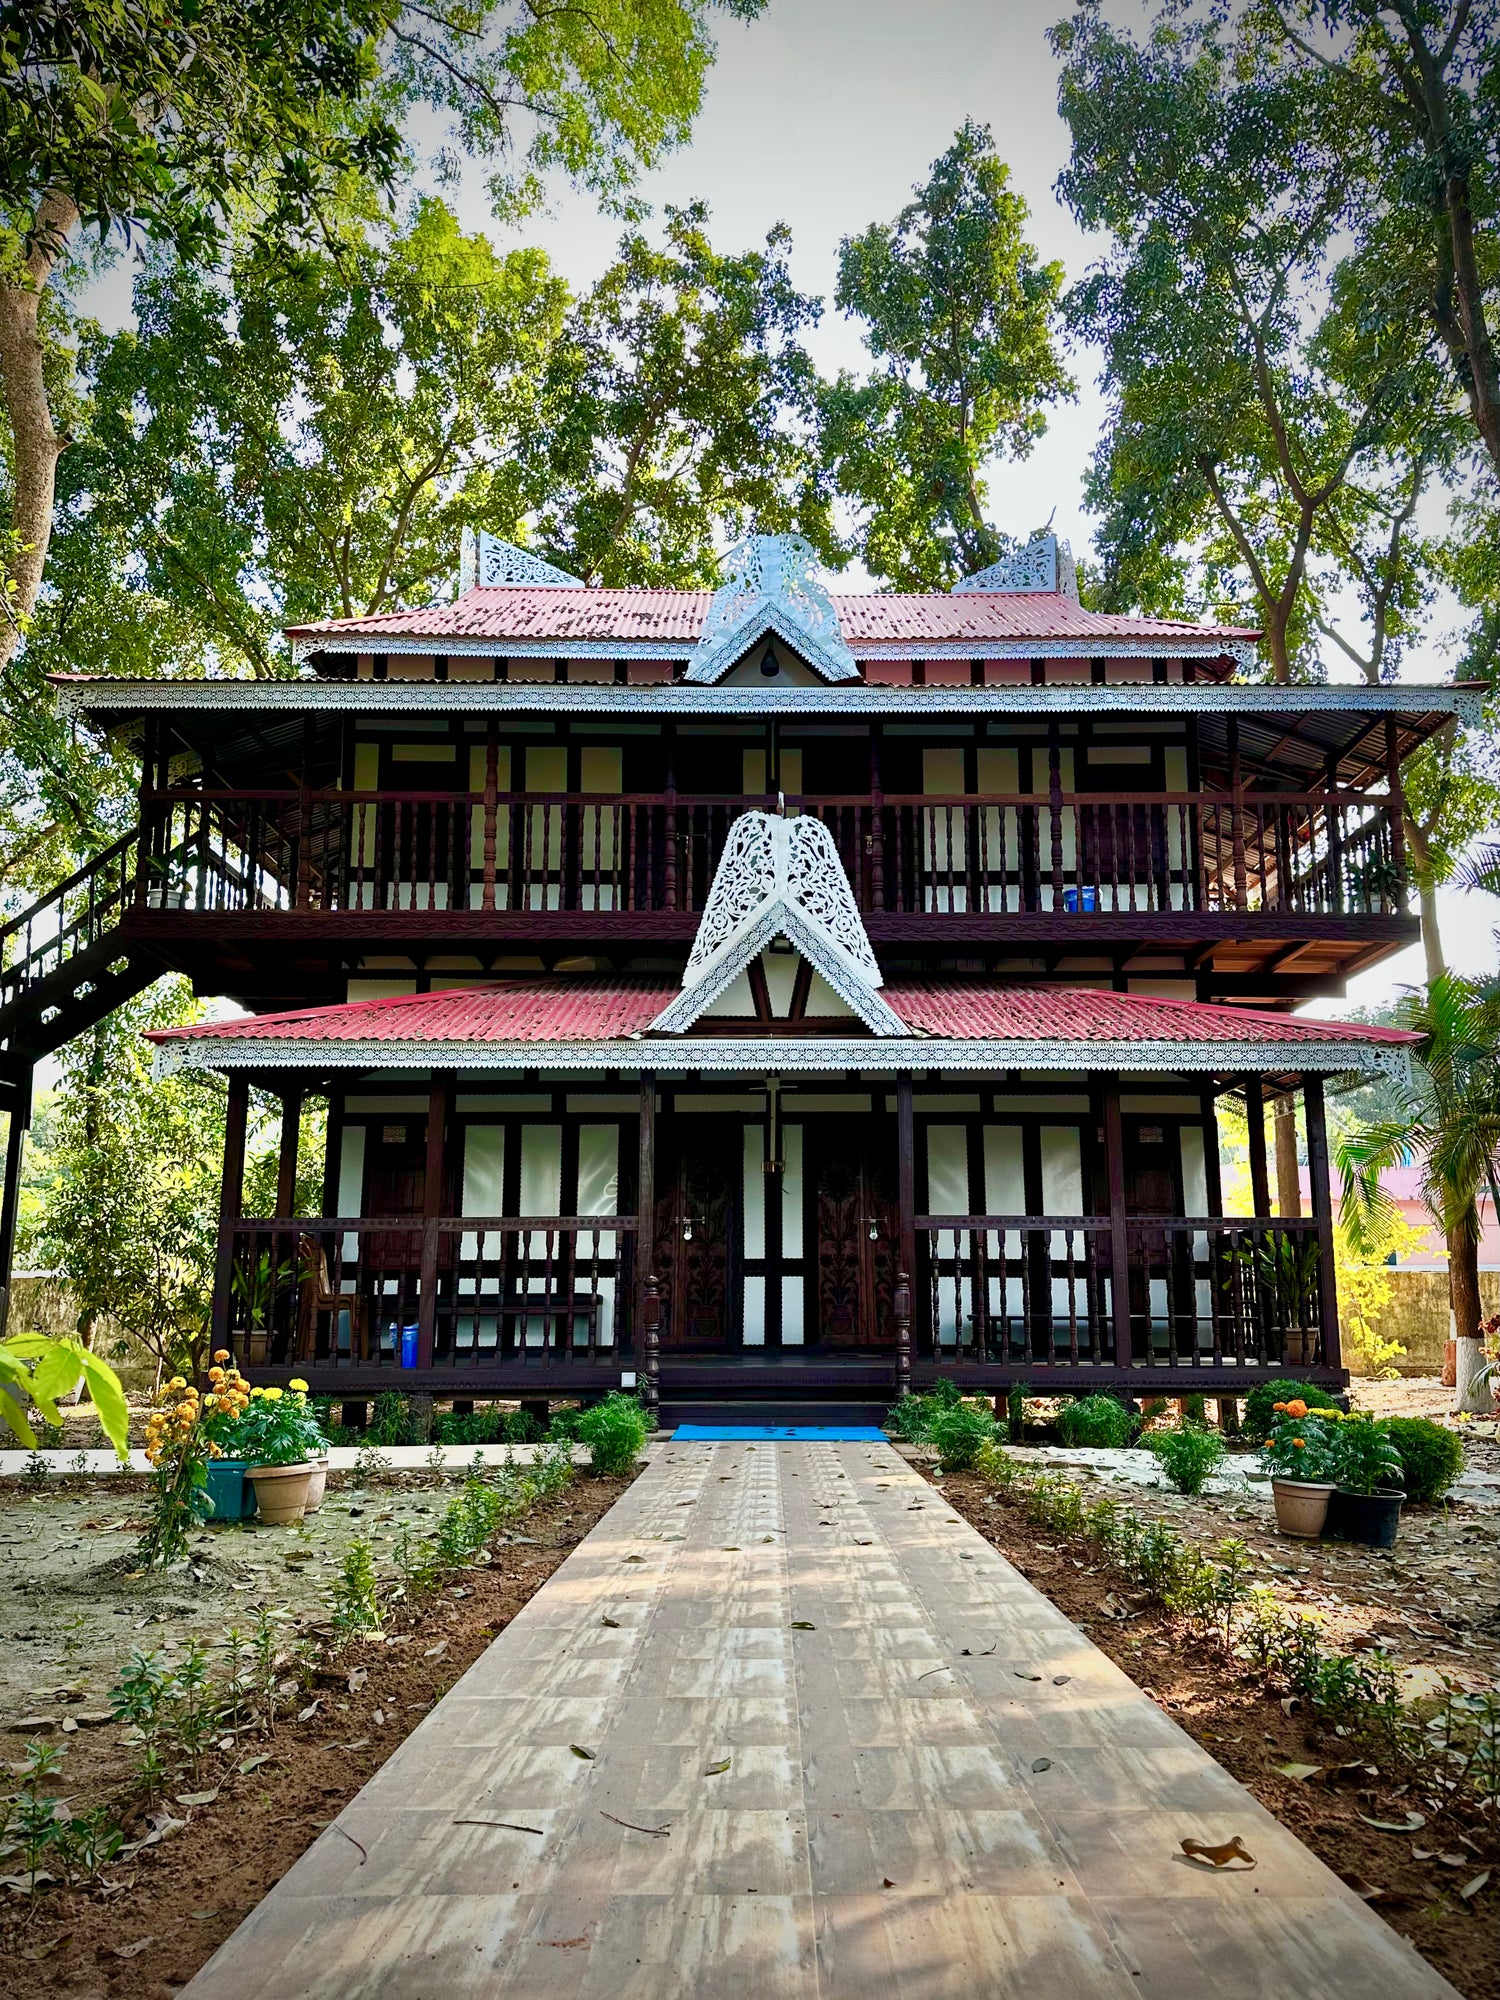 Traditional elevated Japanese wooden cottage at Barnochata, a Dhaka hotel and resort in Savar, set amidst lush greenery with a wooden walkway.